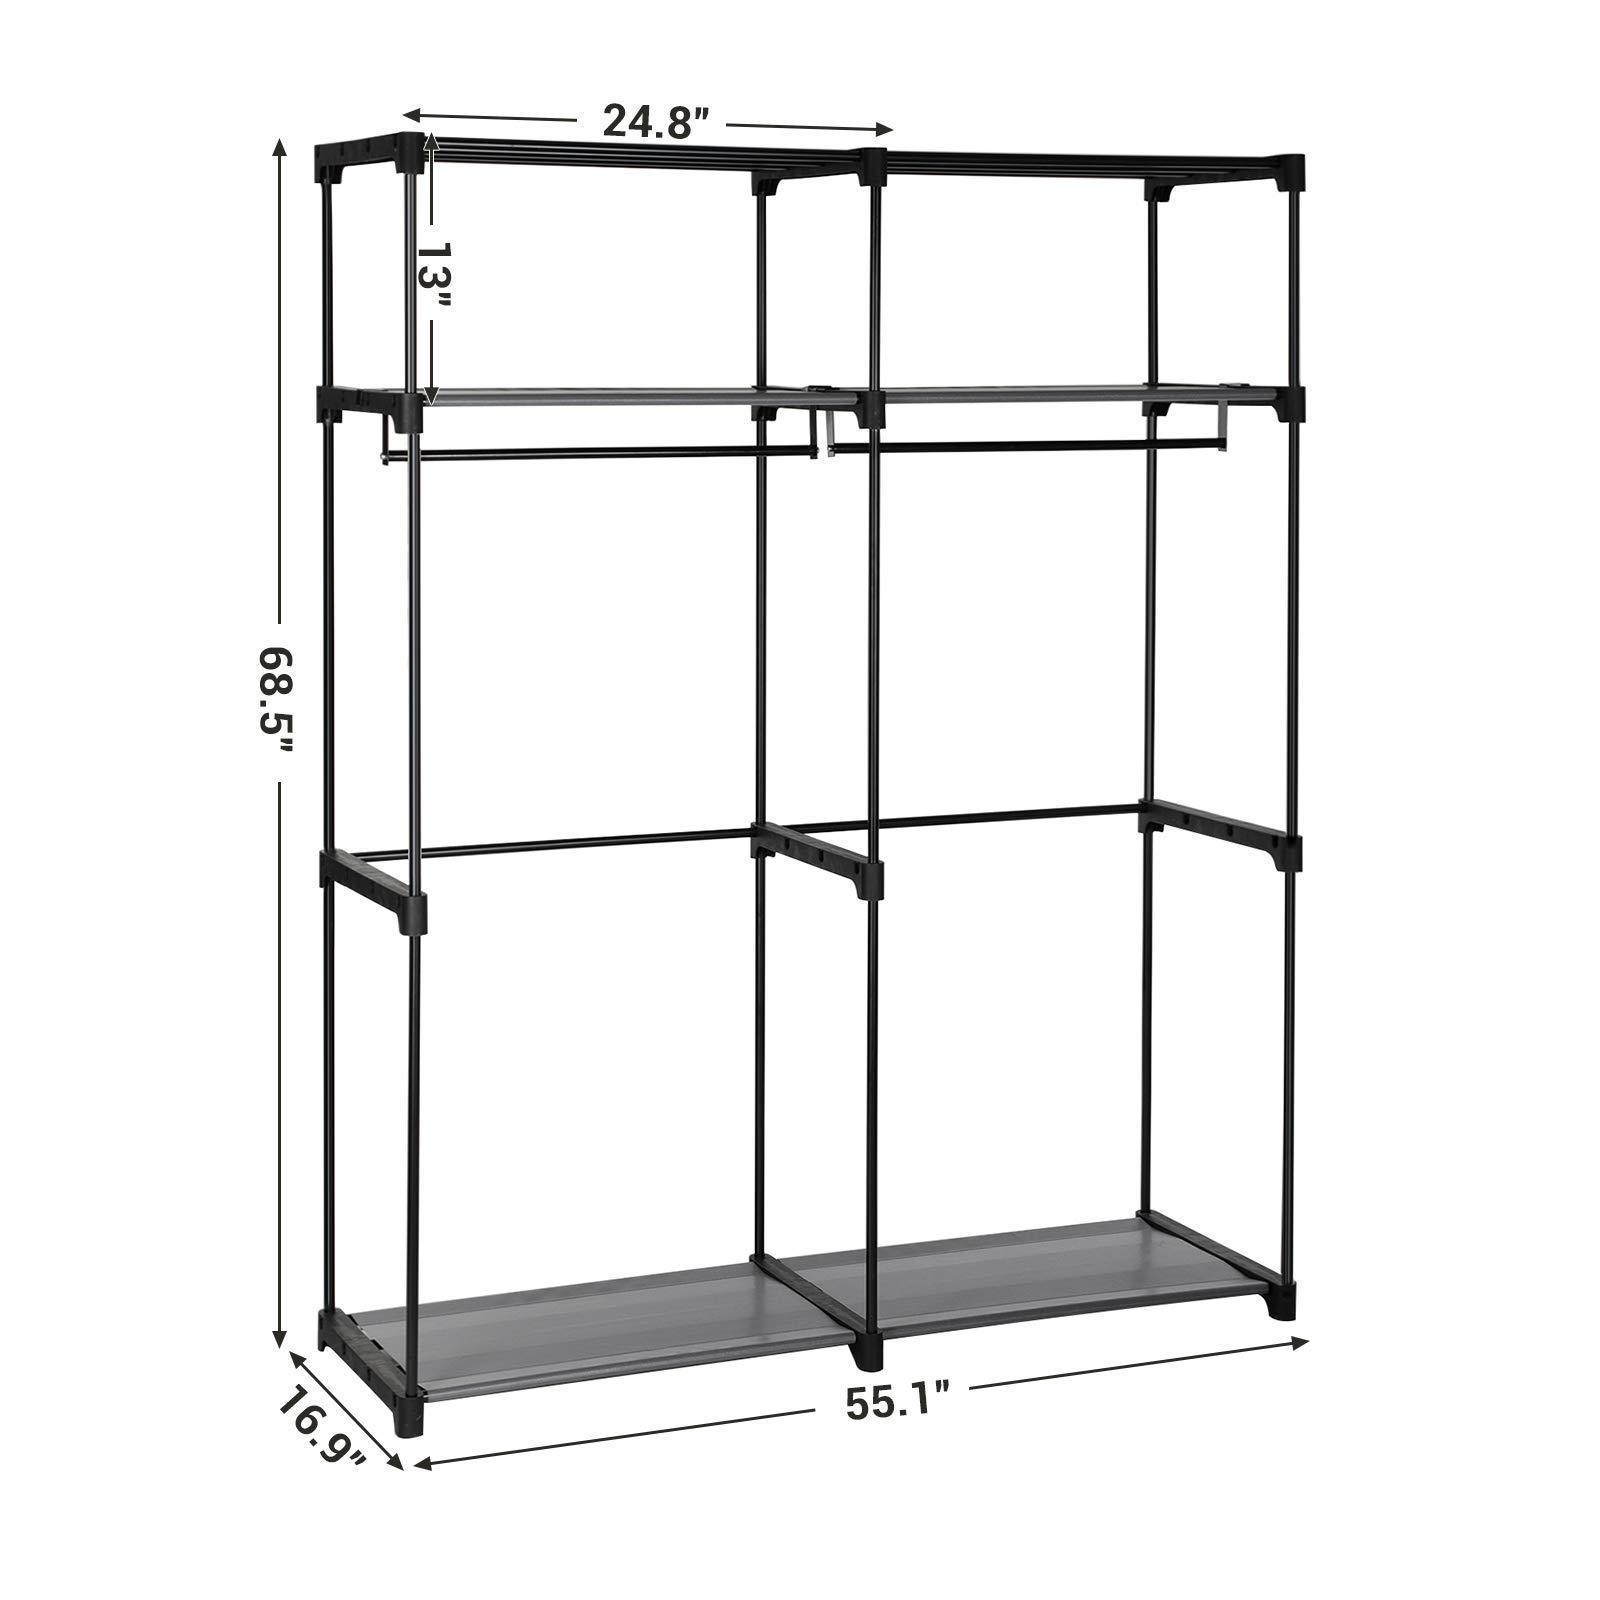 Related songmics closet storage organizer portable wardrobe with hanging rods clothes rack foldable cloakroom study stable 55 1 x 16 9 x 68 5 inches gray uryg02gy